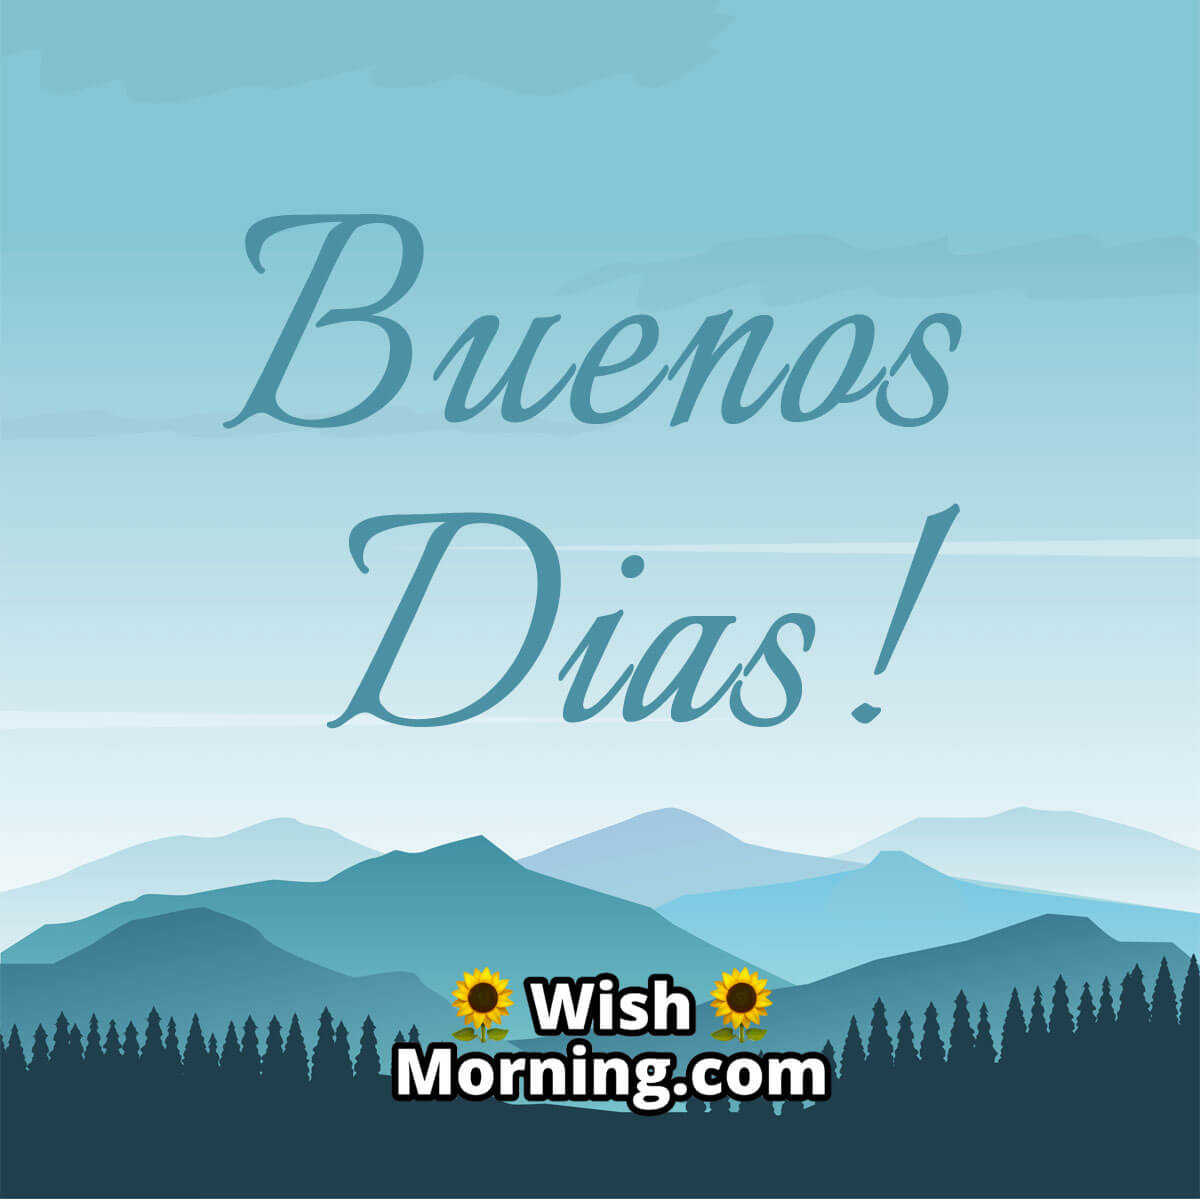 good morning quotes for him in spanish